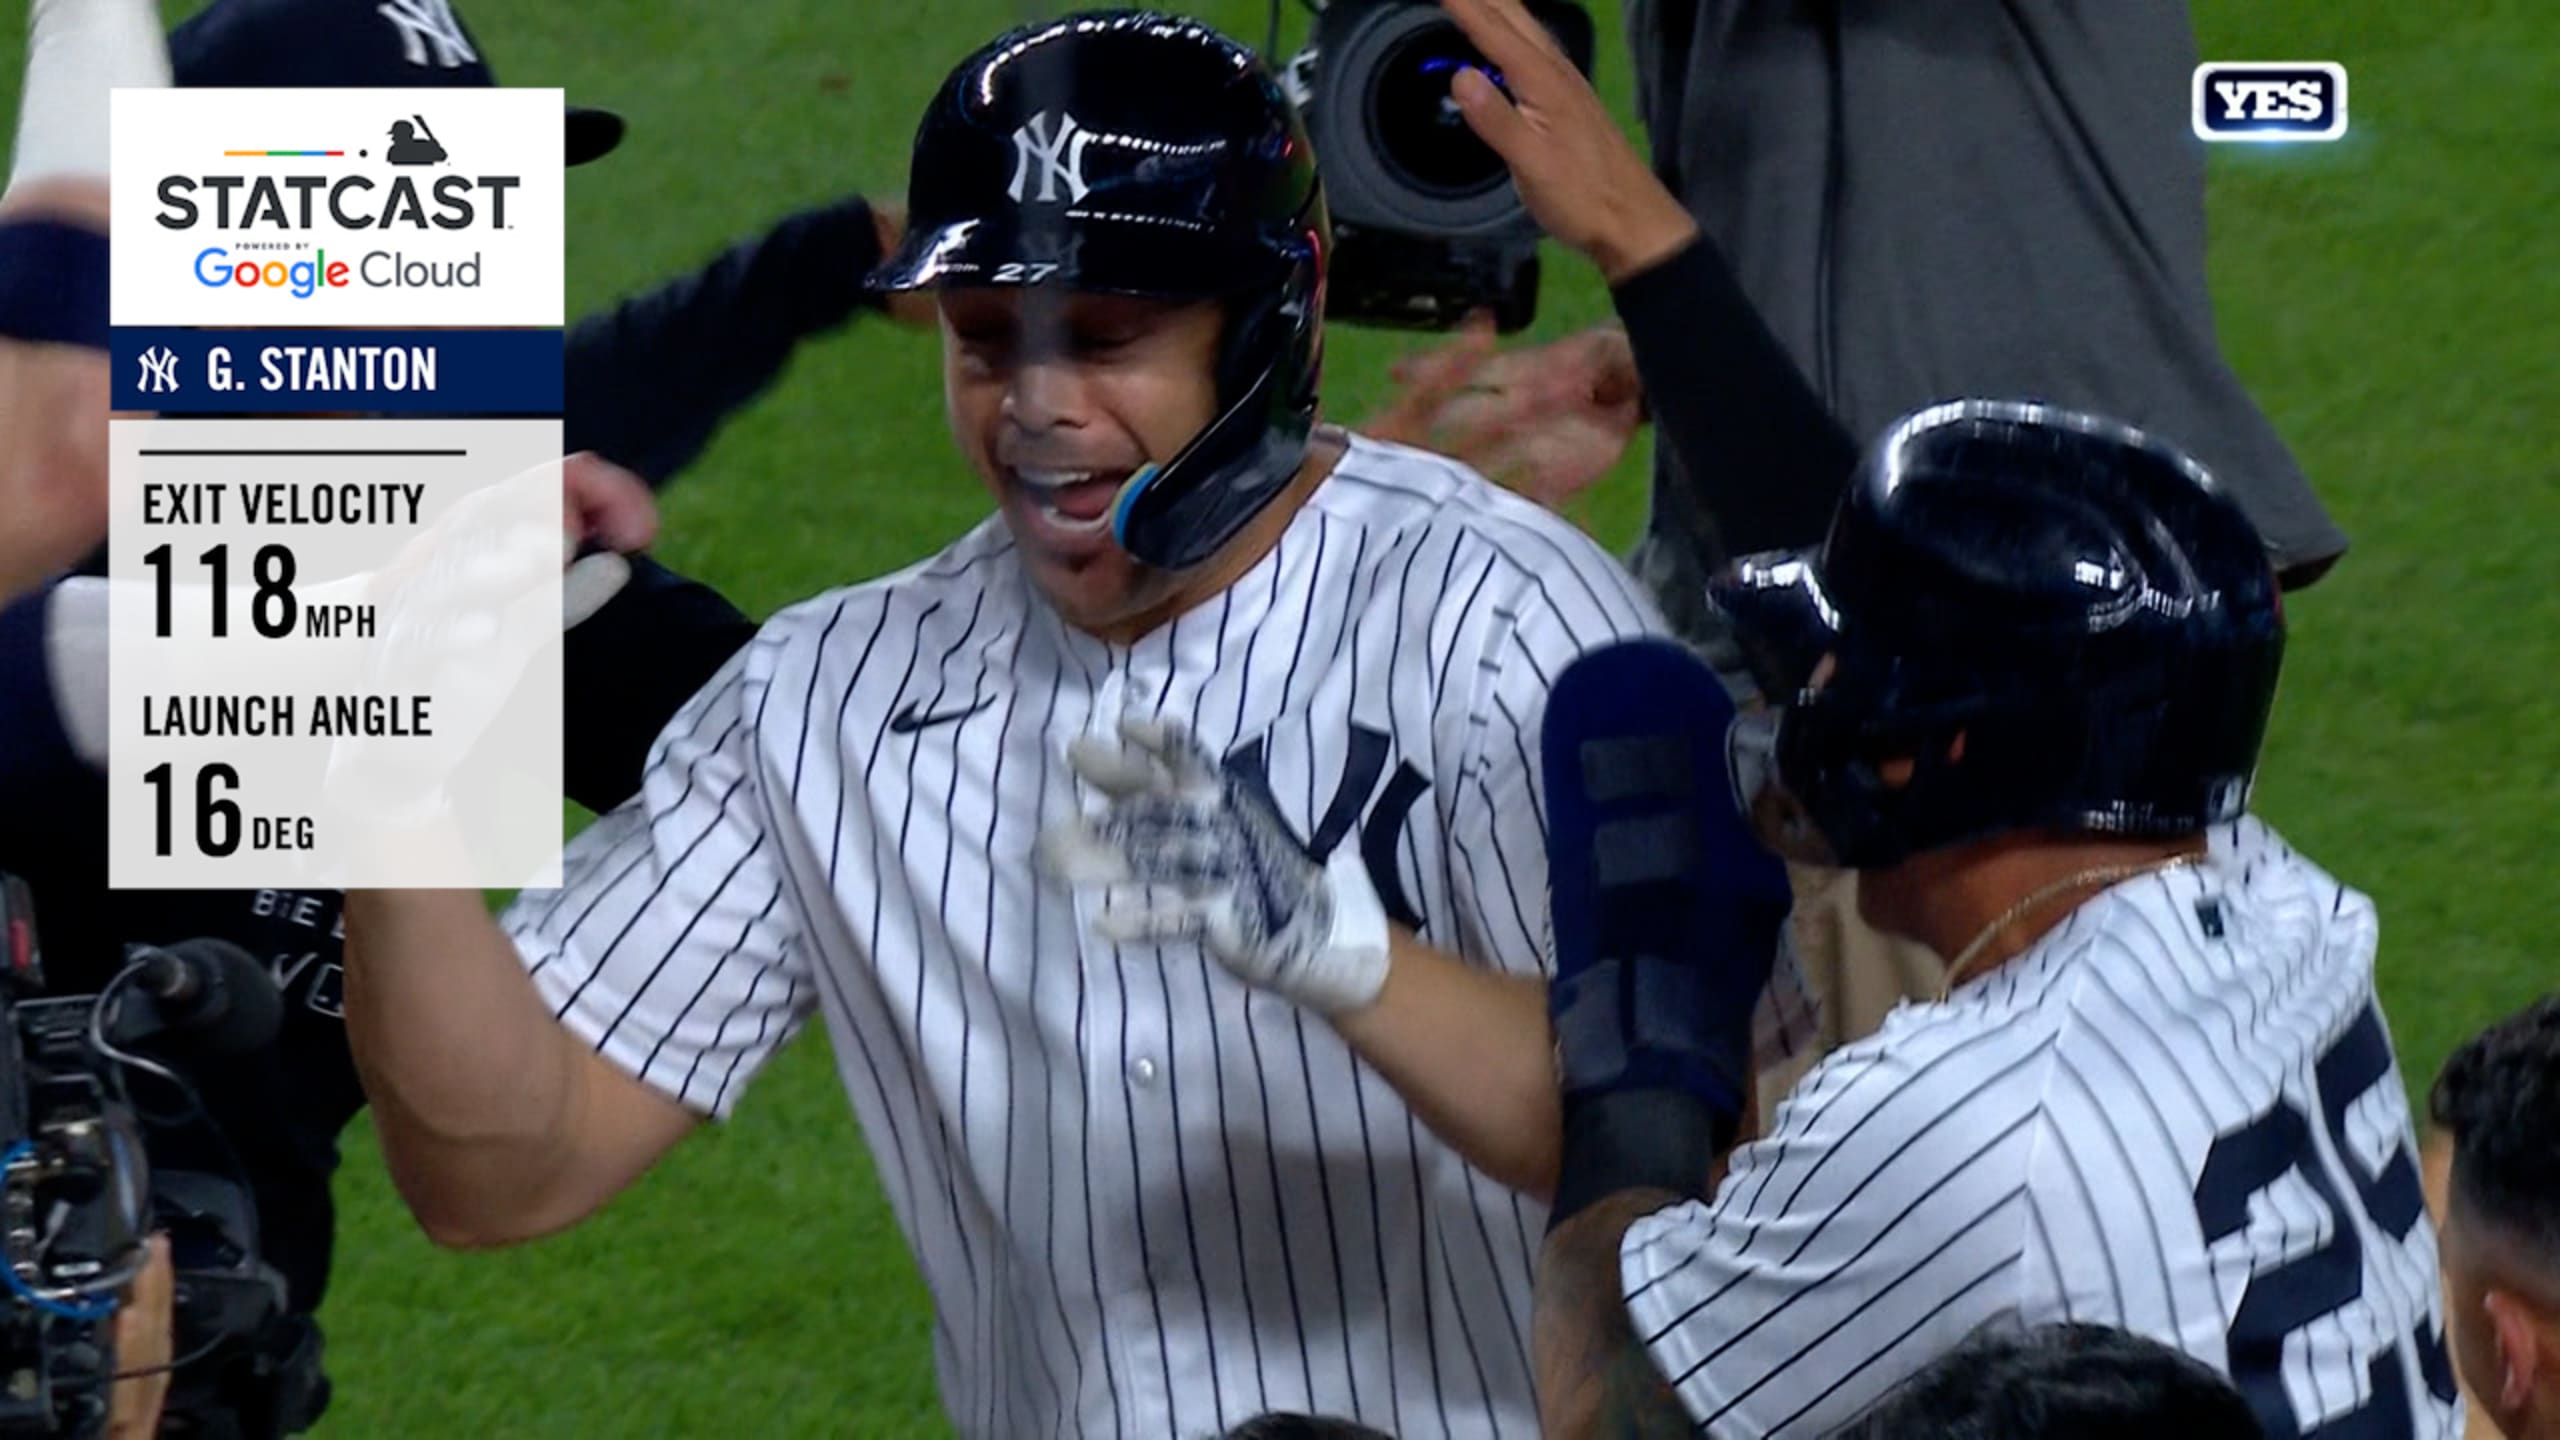 Twitter explodes after Aaron Judge's 60th HR, Giancarlo Stanton walkoff  grand slam